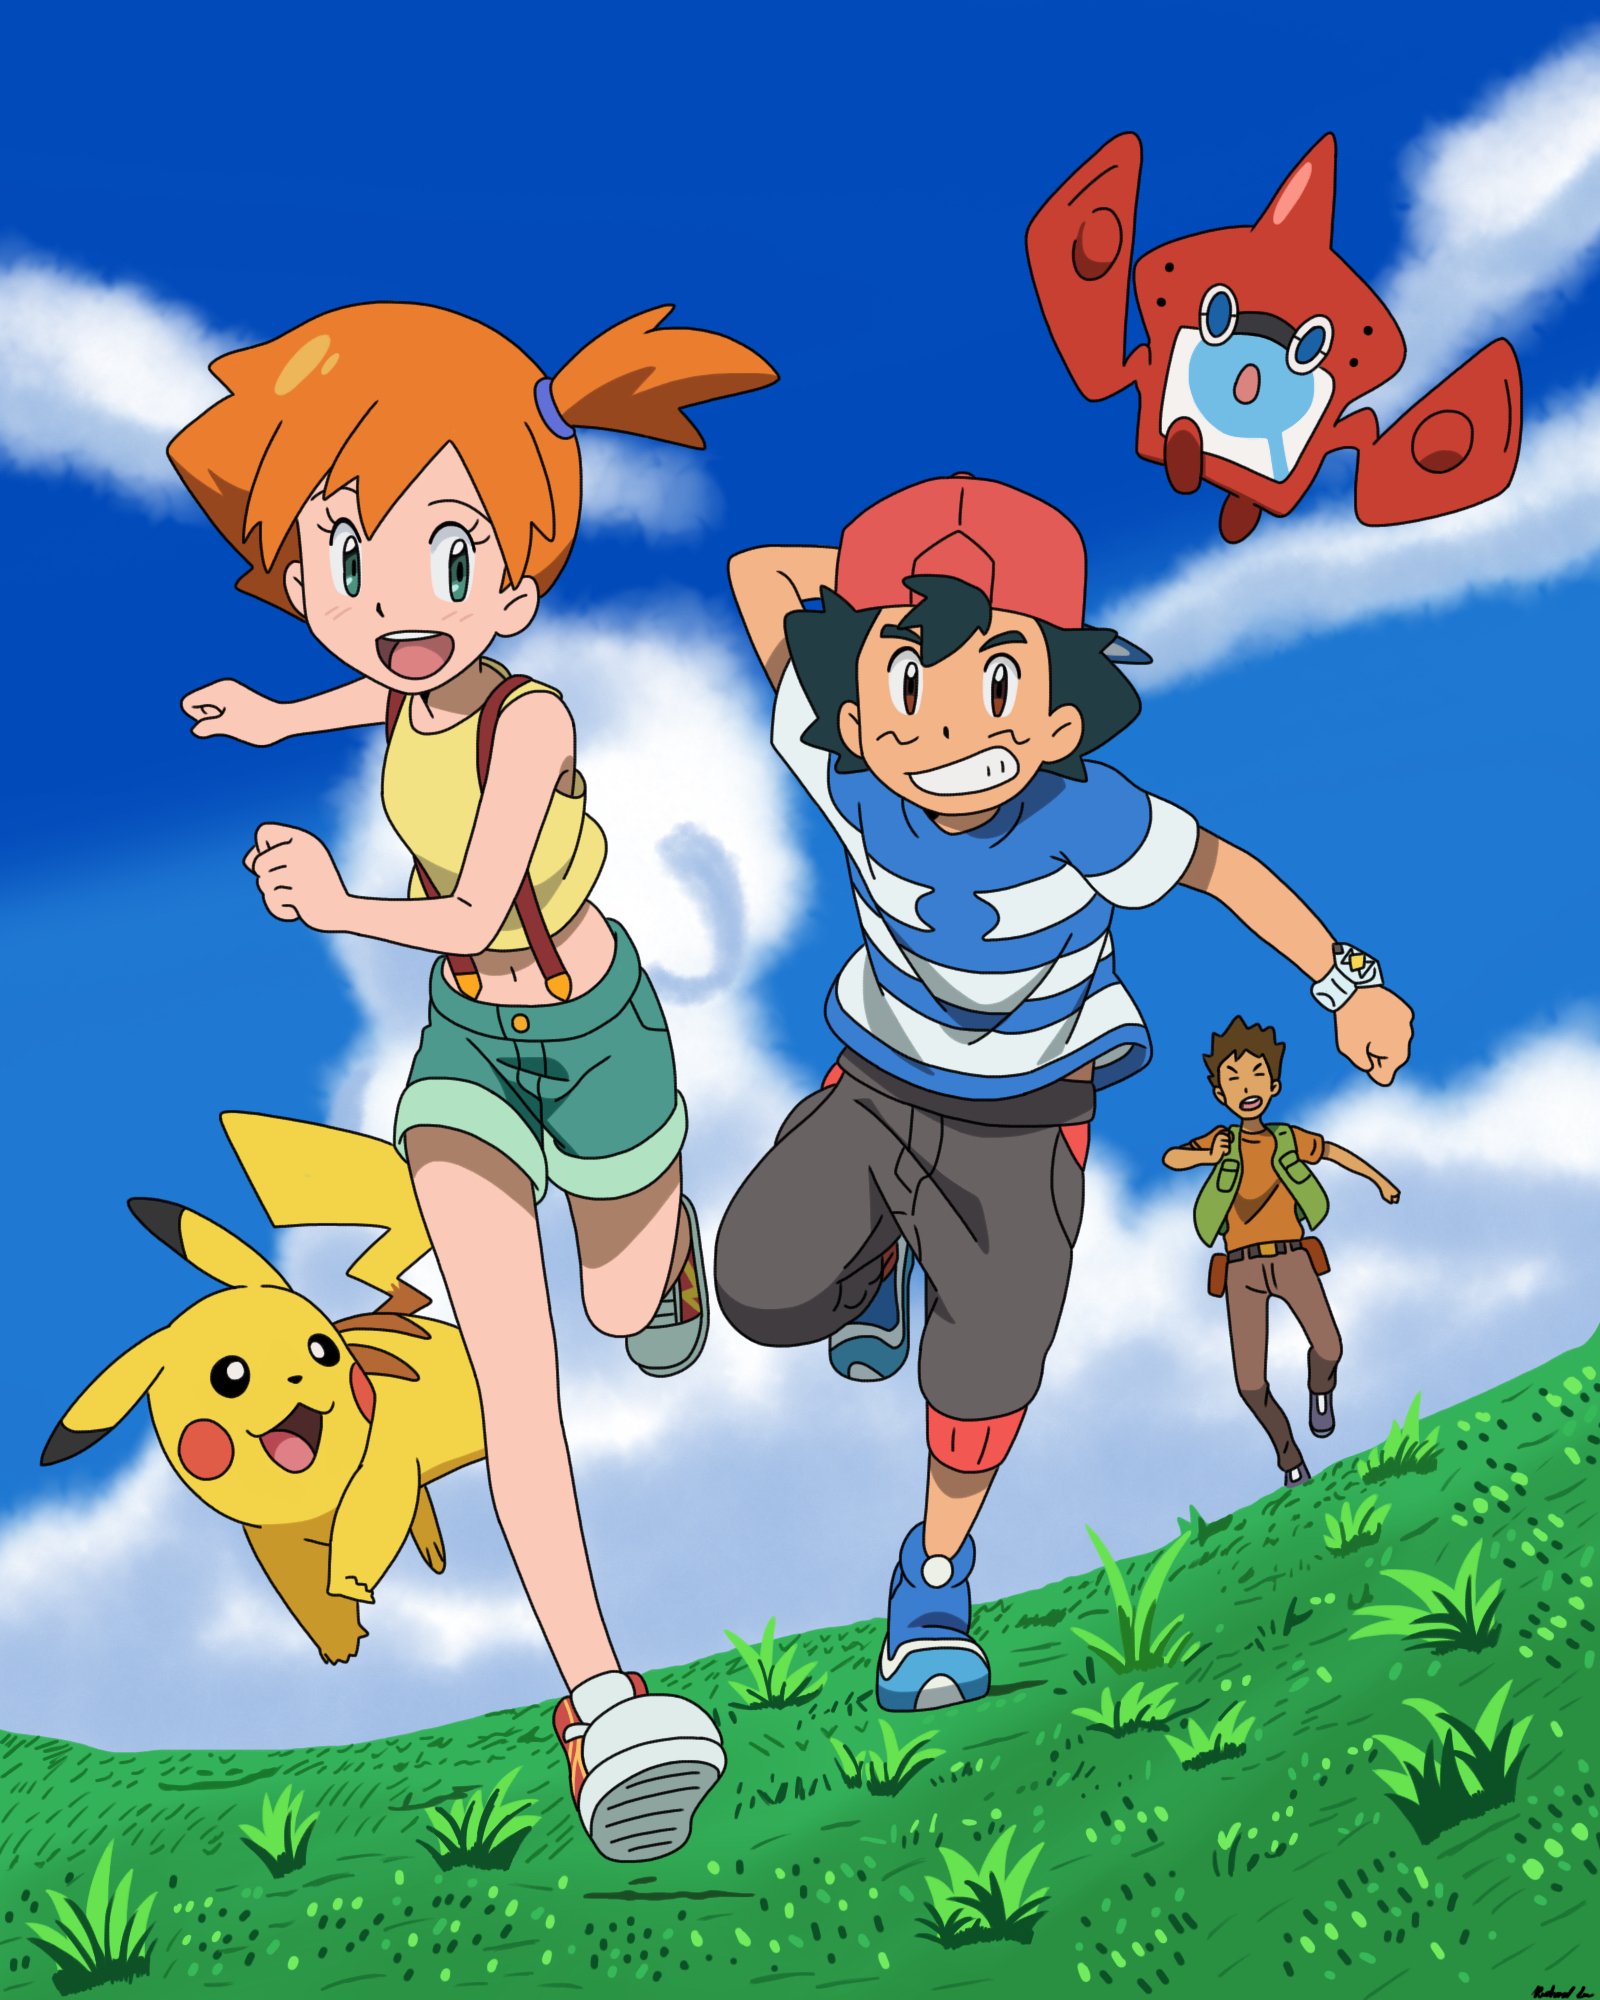 Ash, Misty and Brock by a href="https://alphacoders.com/author/view/52...